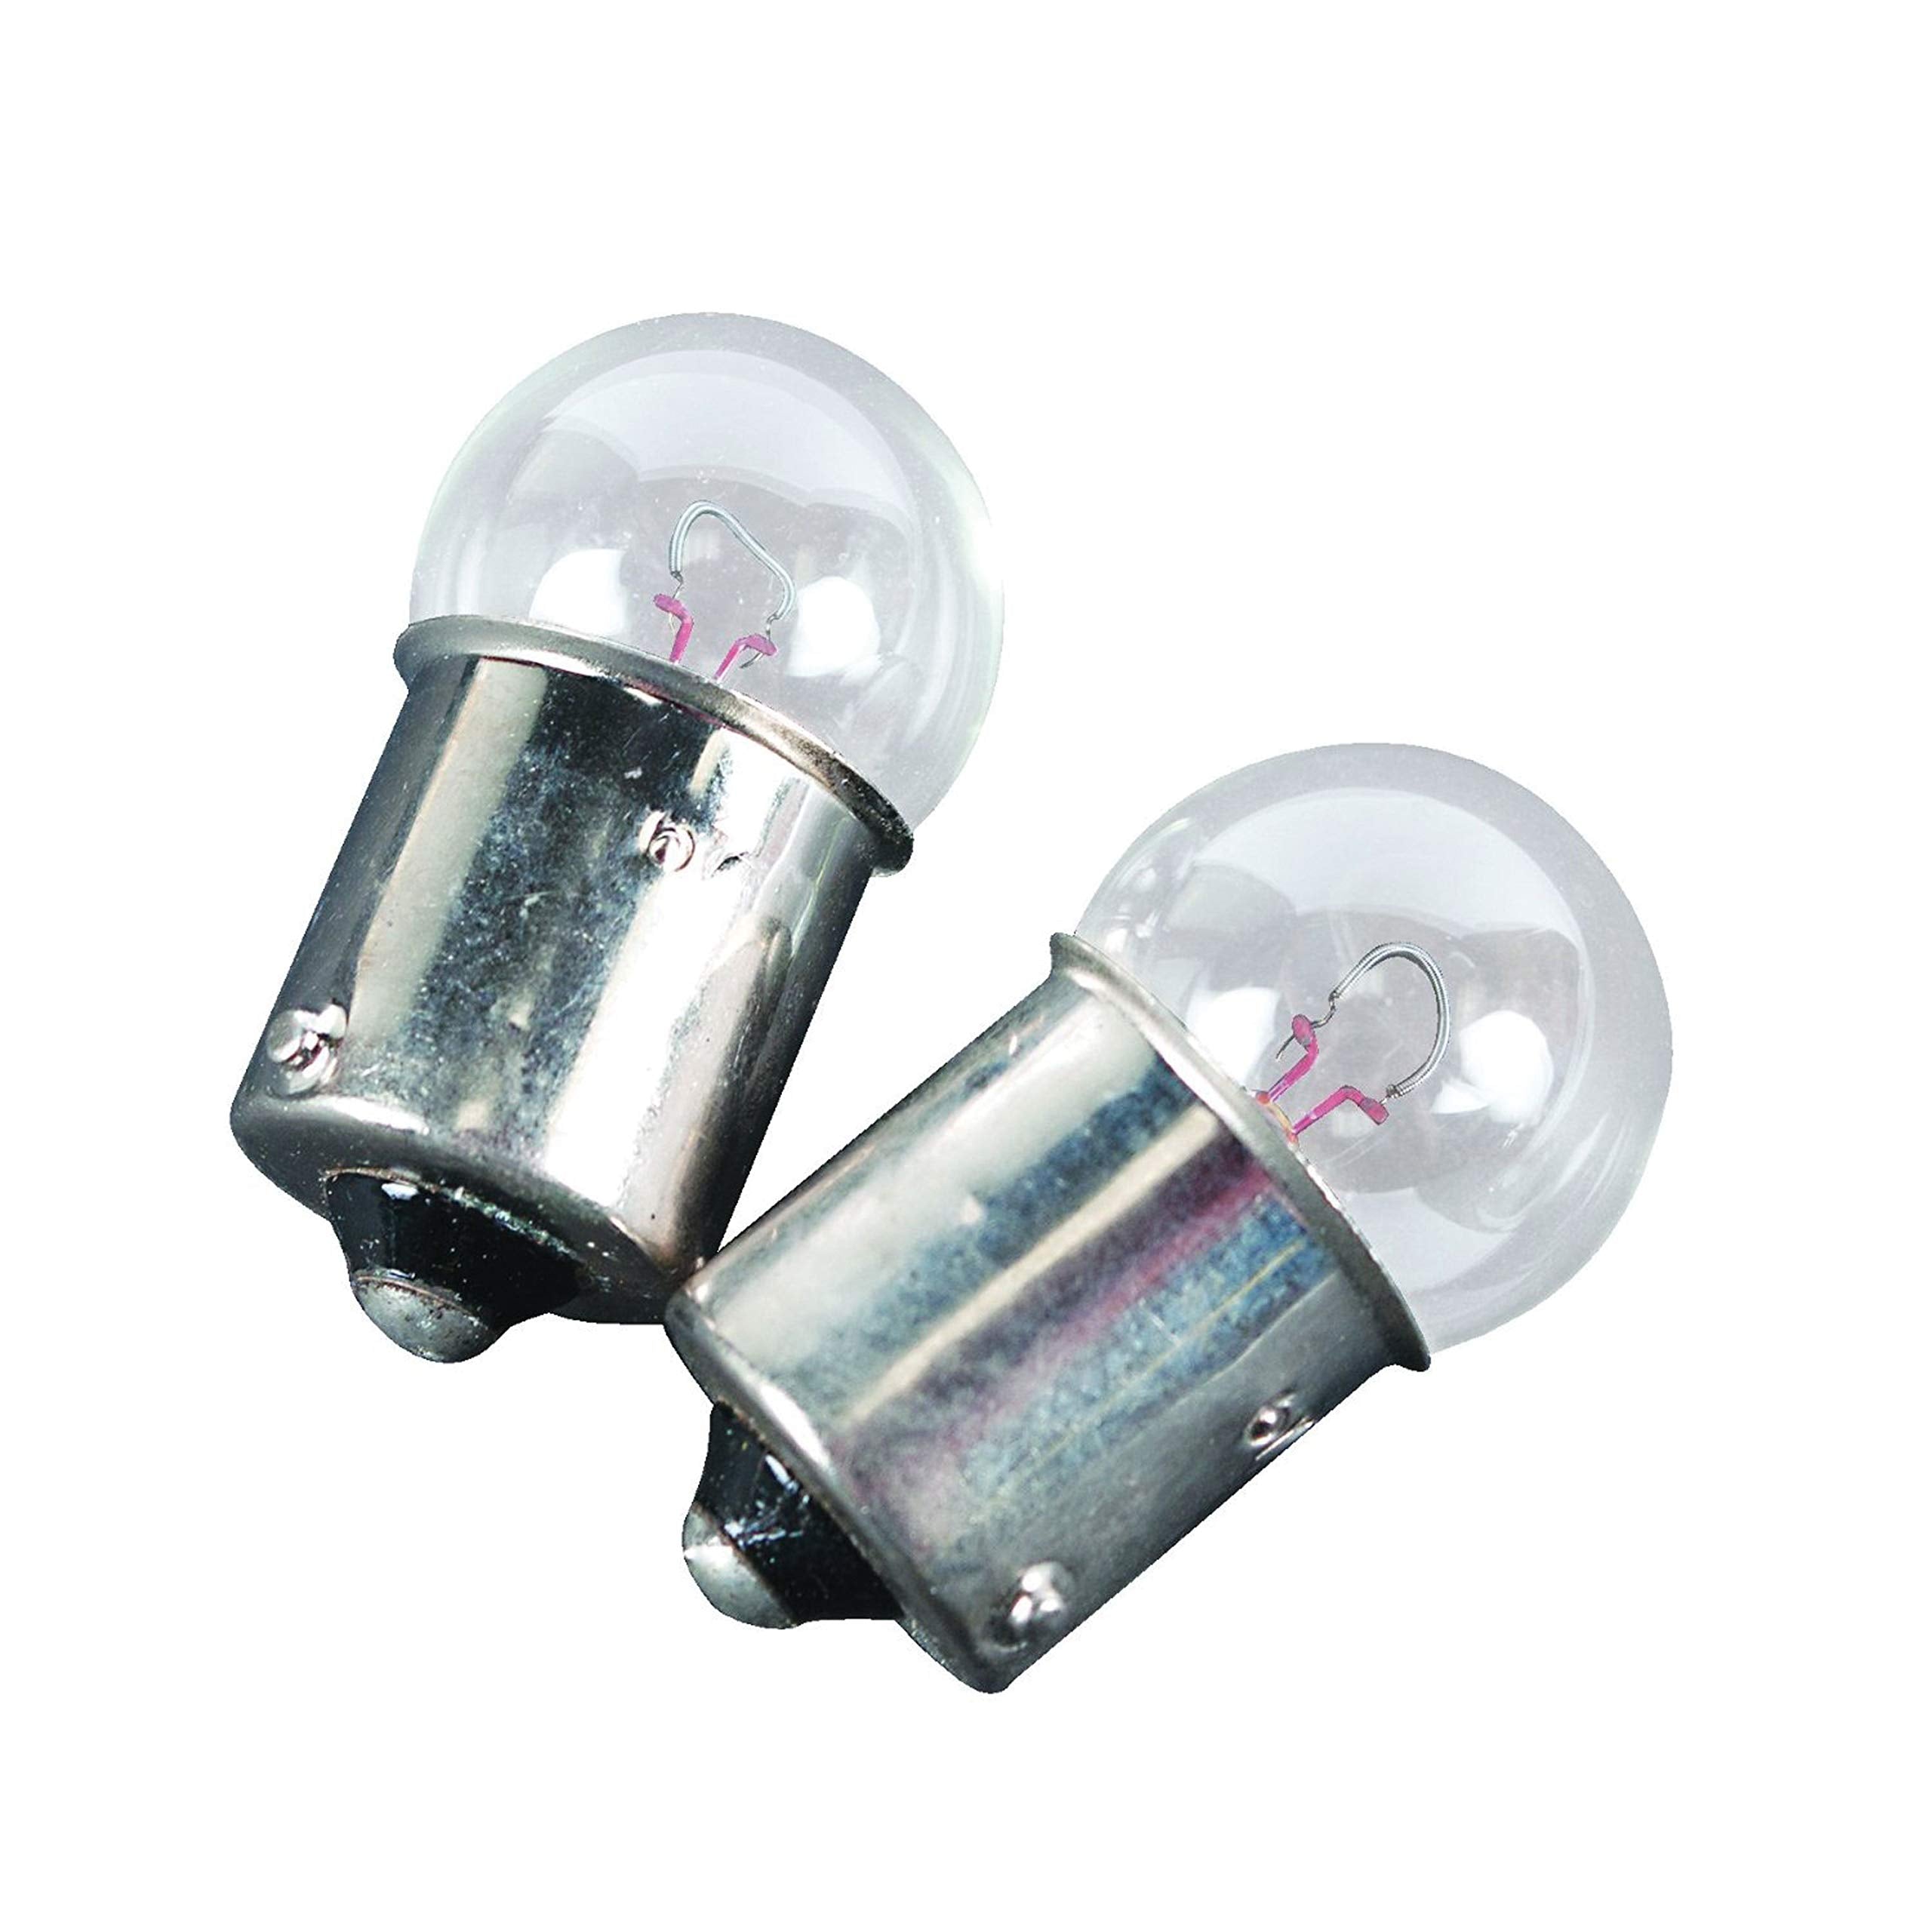 Camco 54721 Replacement 67 Auto License Plate Light Bulb - Box of 2